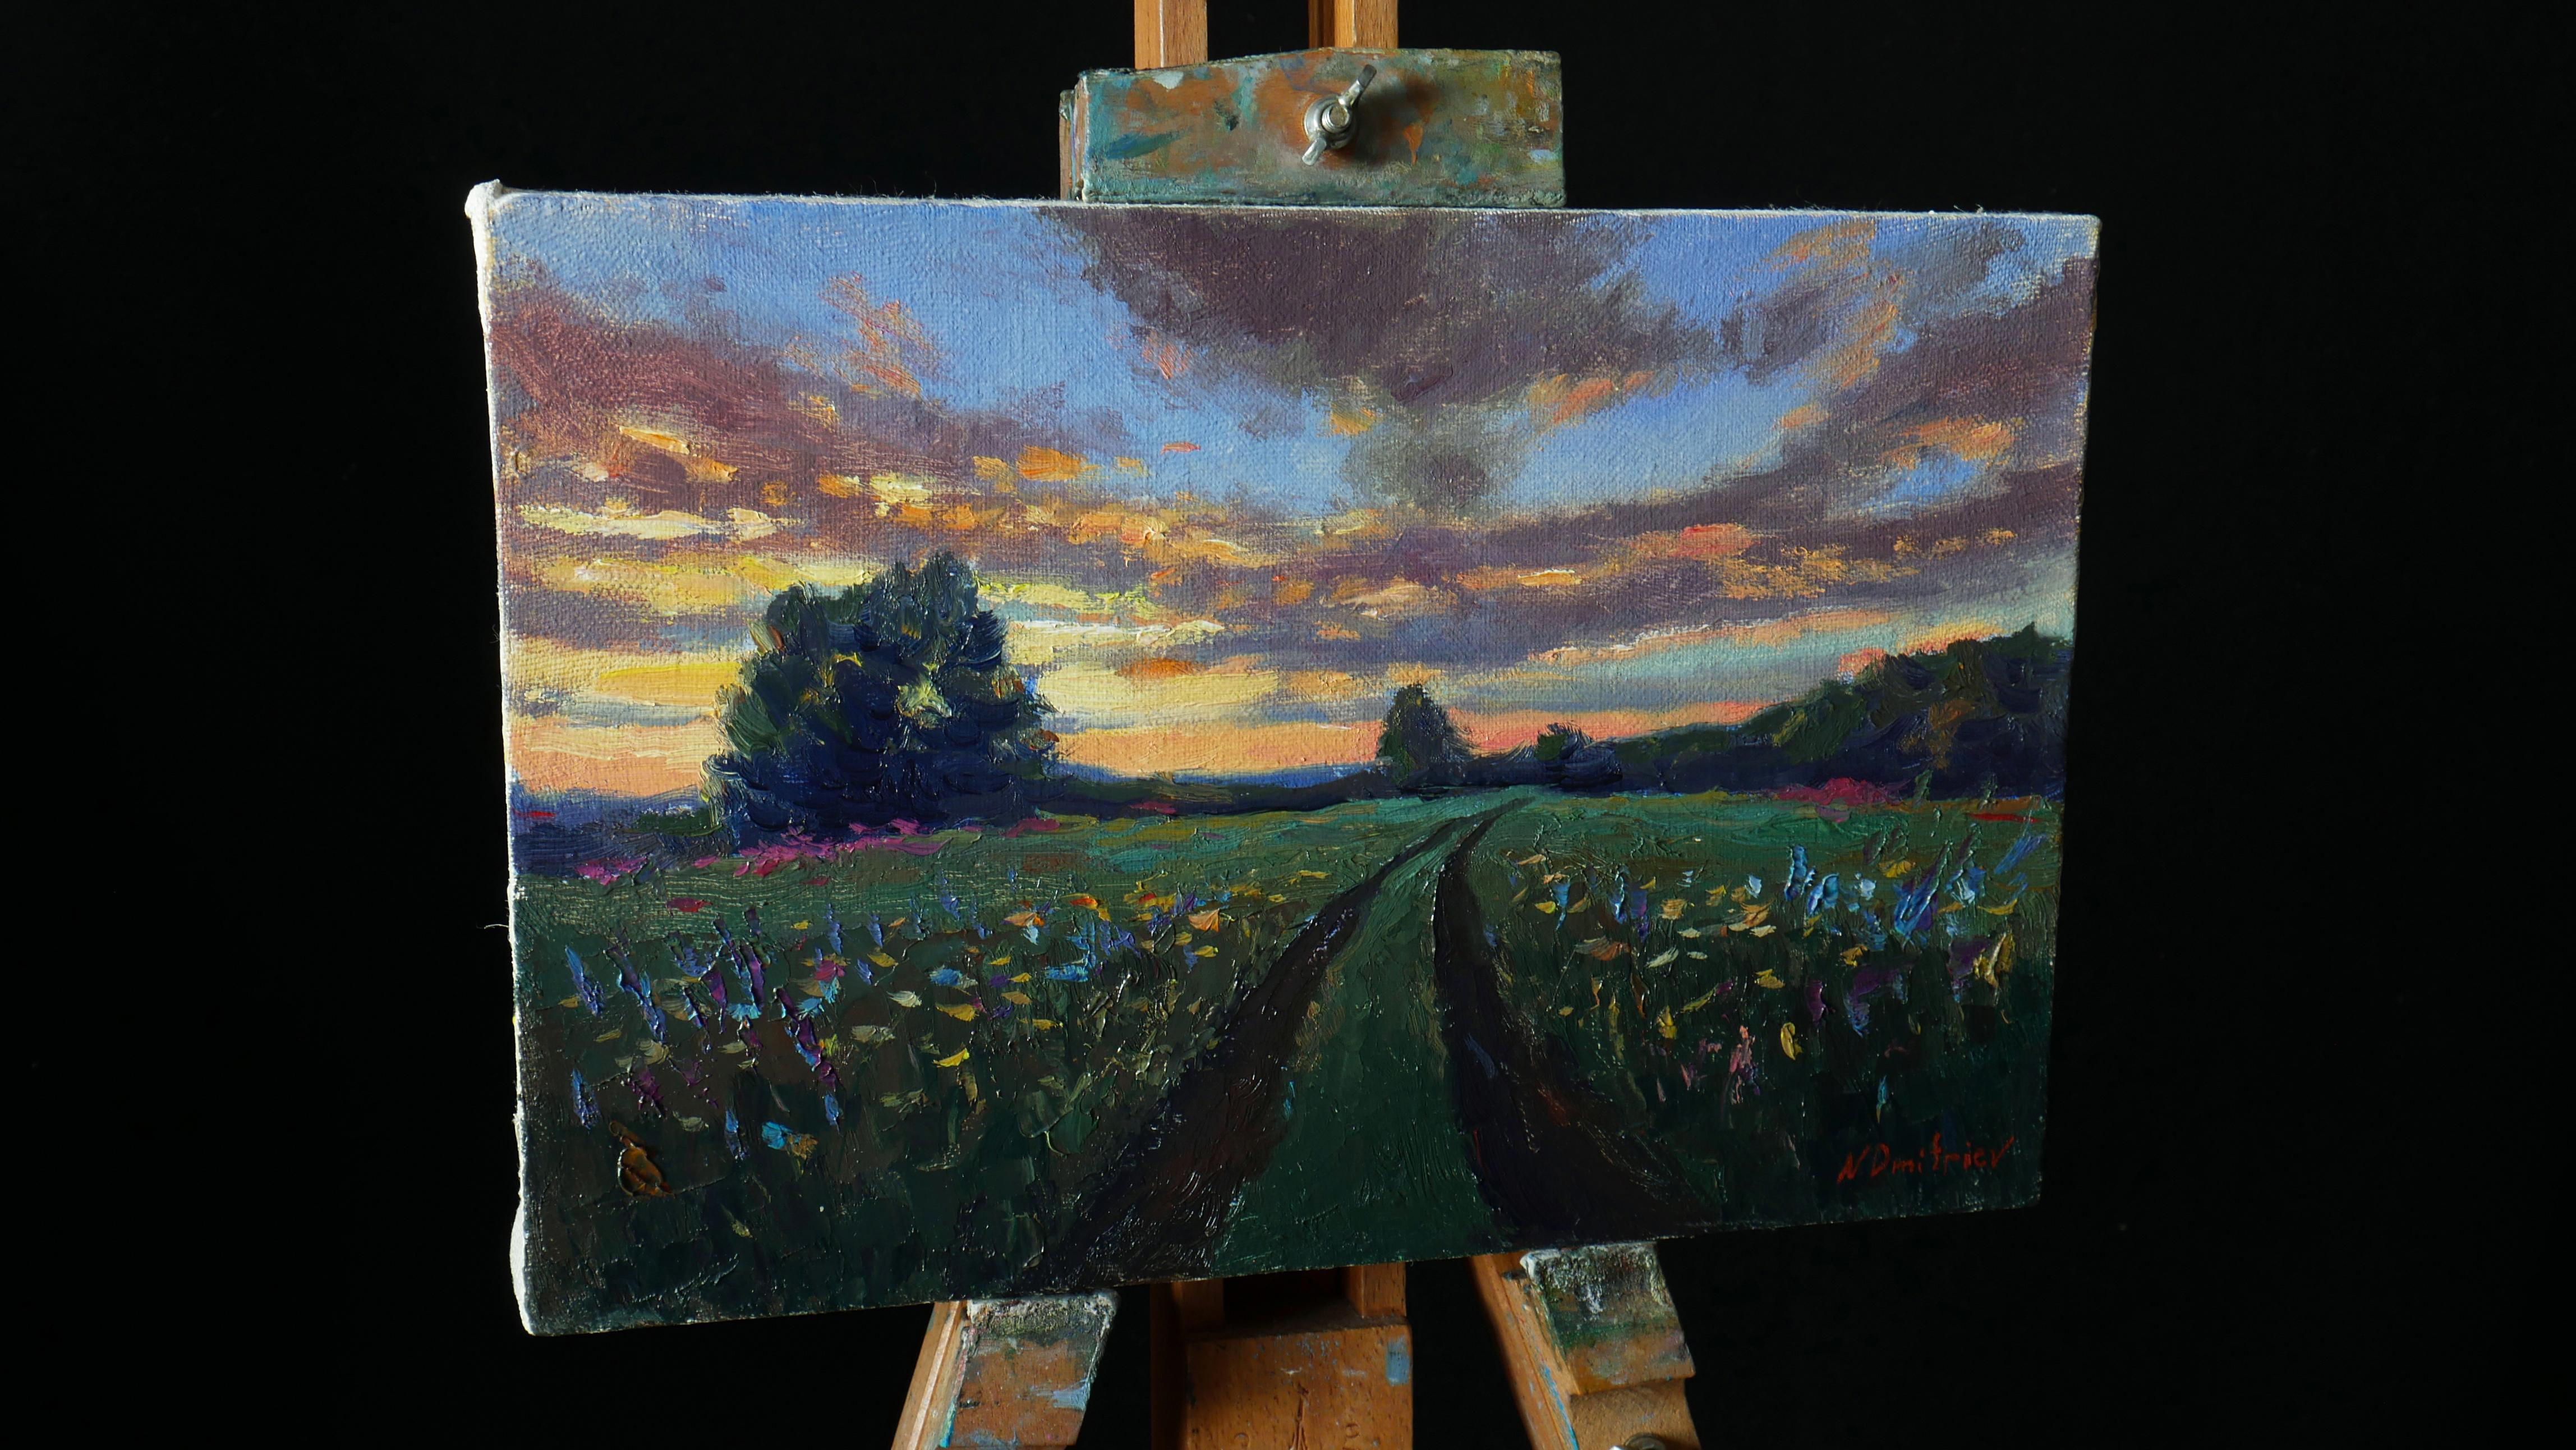 Sunset Over Wildflowers Field - summer landscape painting - Painting by Nikolay Dmitriev